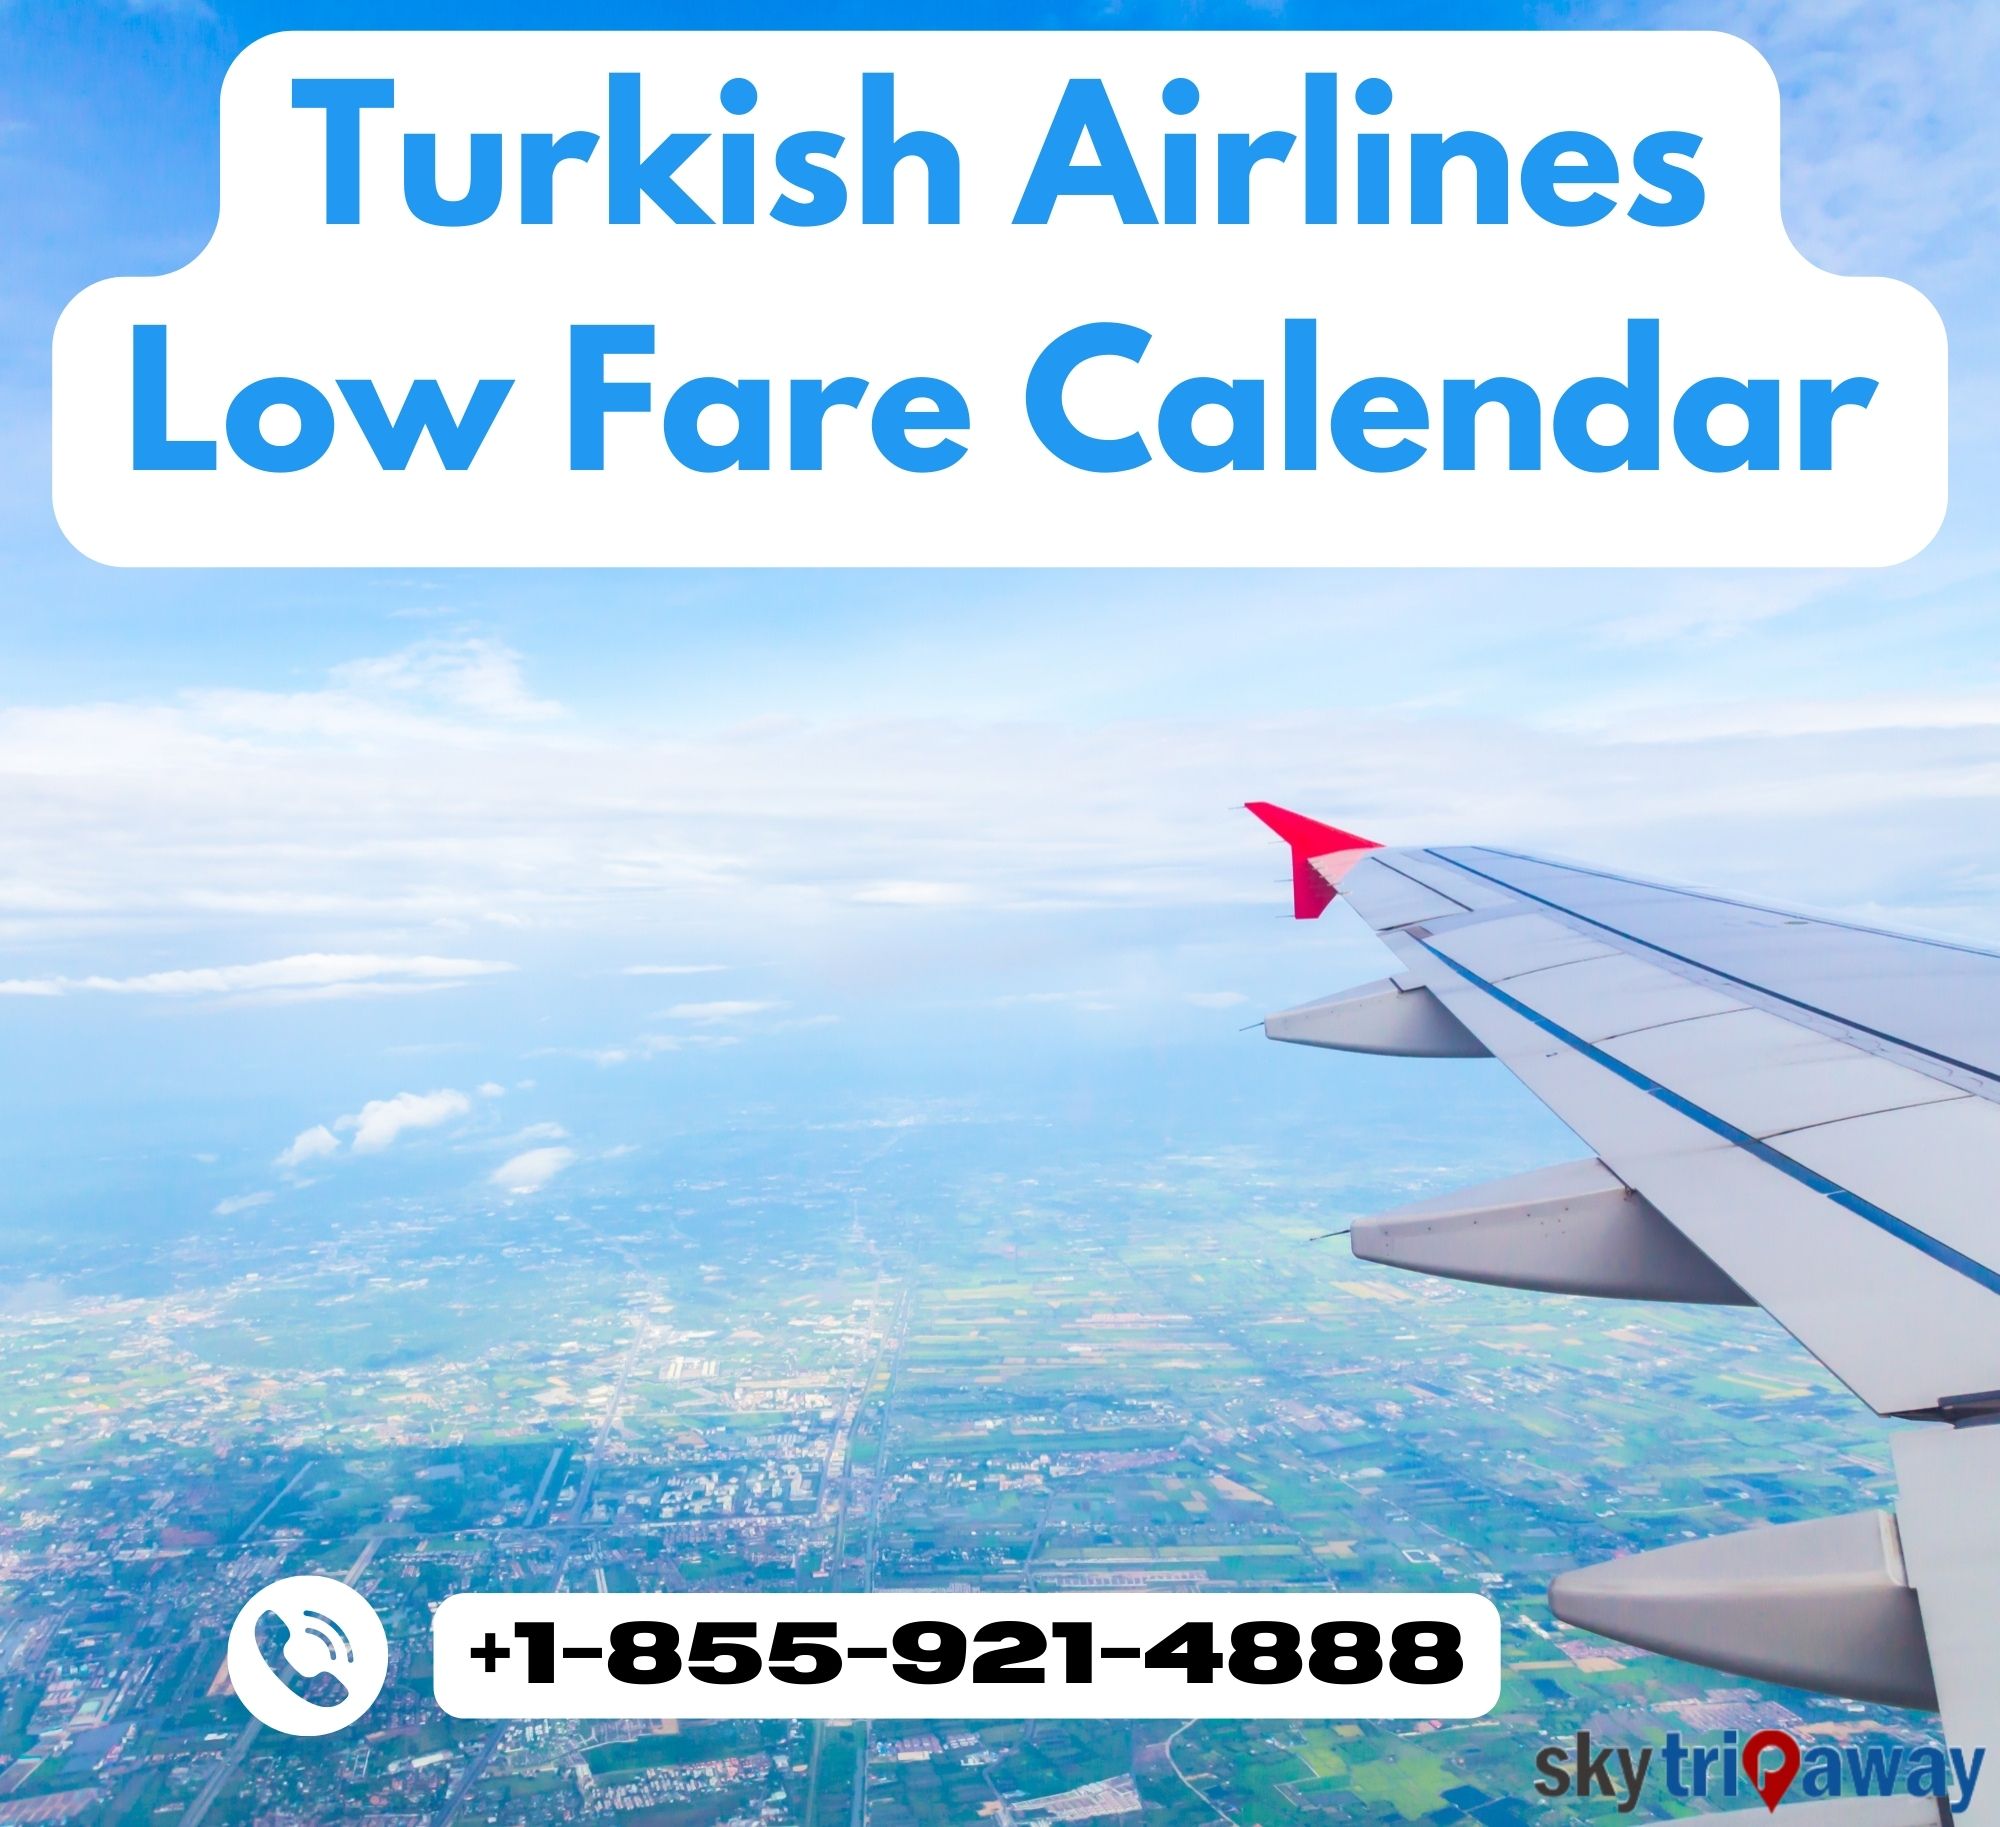 Book Affordable Flight With Turkish Airlines Low Fare Calendar Tegara